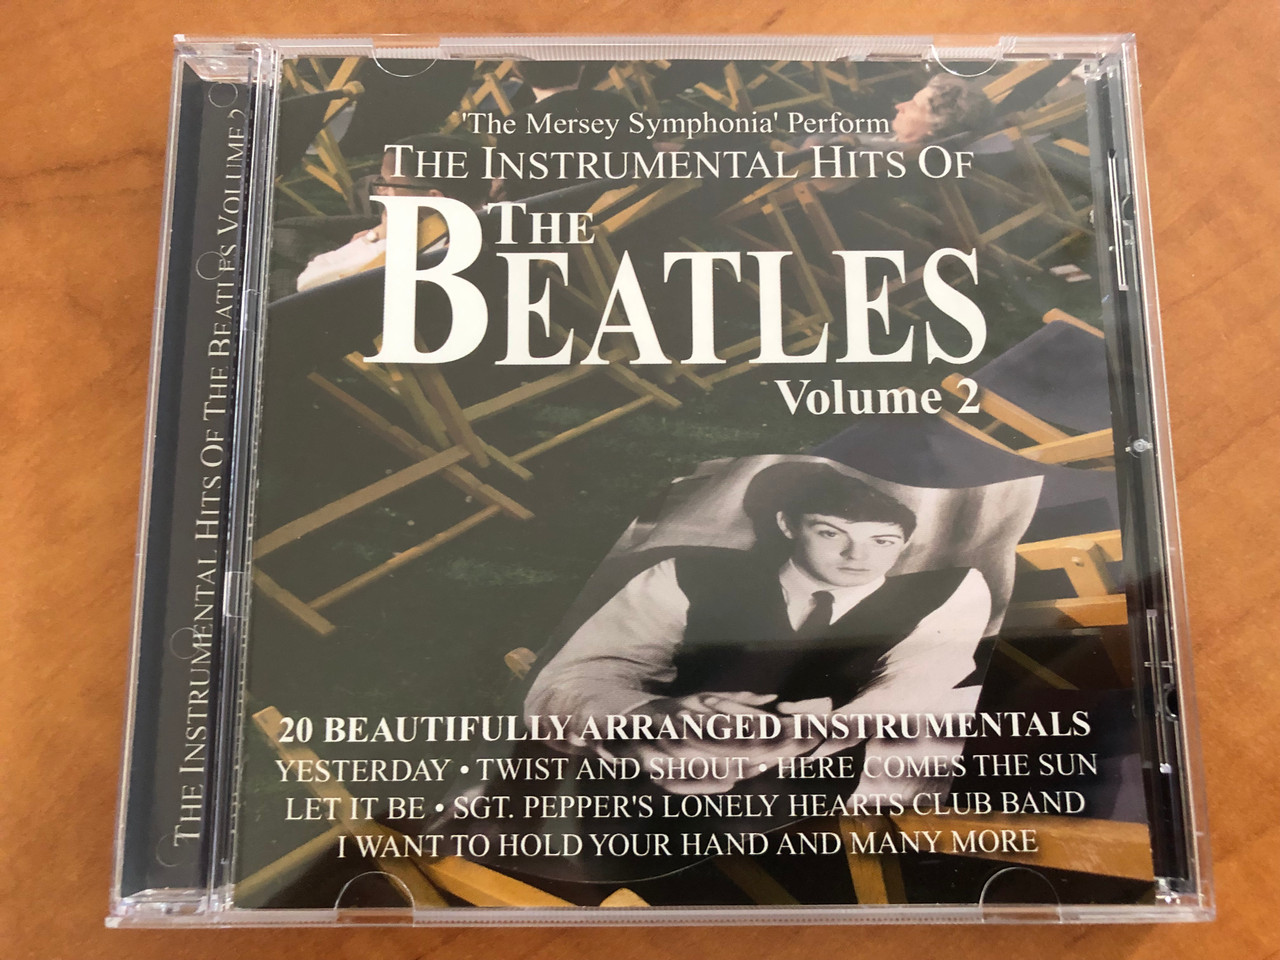 https://cdn10.bigcommerce.com/s-62bdpkt7pb/products/30791/images/181791/The_Mersey_Symphonia_Perform_-_The_Instrumental_Hits_Of_The_Beatles_-_Volume_2_20_Beautifully_Arranged_Instrumentals_Yesterday_Twist_And_Shout_Here_Comes_The_Sun_Let_It_Be_Musicbank_Audi_1__73456.1623837185.1280.1280.JPG?c=2&_ga=2.259239178.1829284140.1623917769-62128686.1623917769